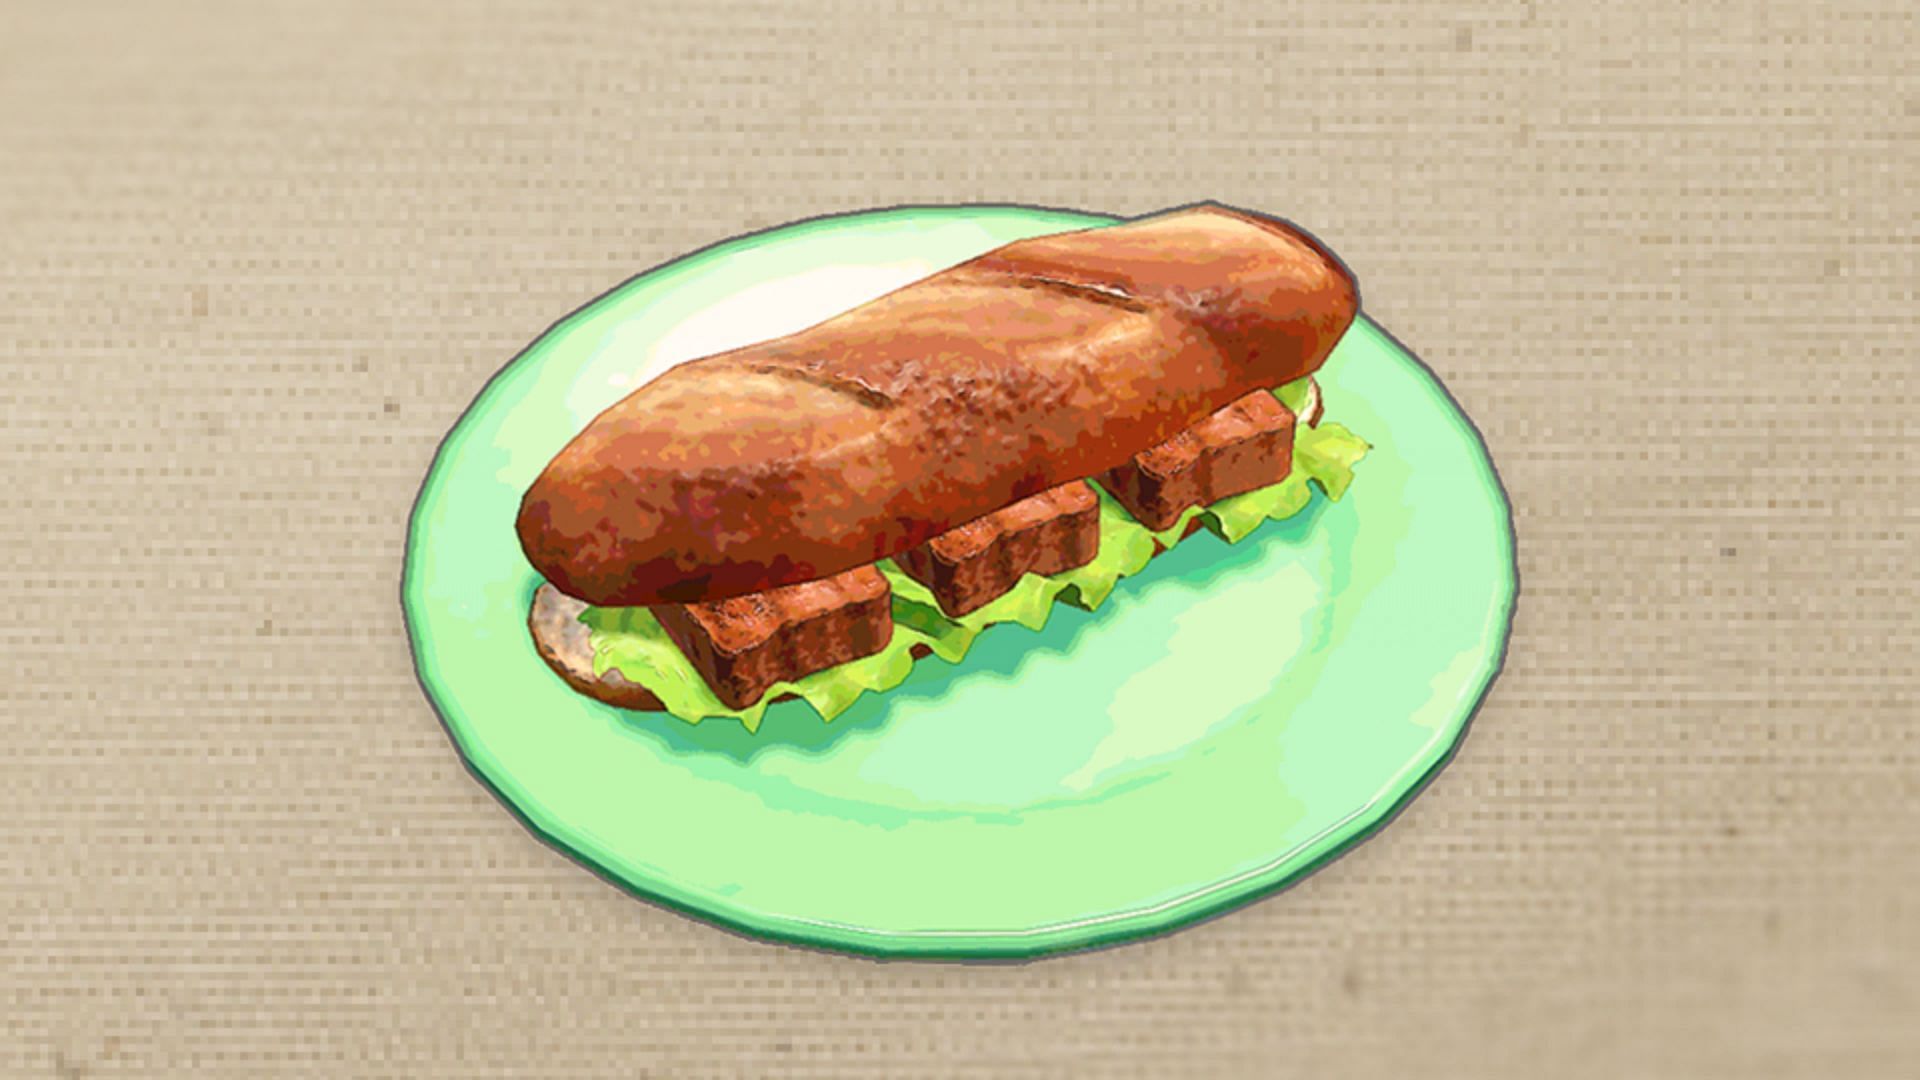 The Legendary Sweet Sandwich is one of many treats that can provide Egg Power in Pokemon Scarlet/Violet (Image via Game Freak)